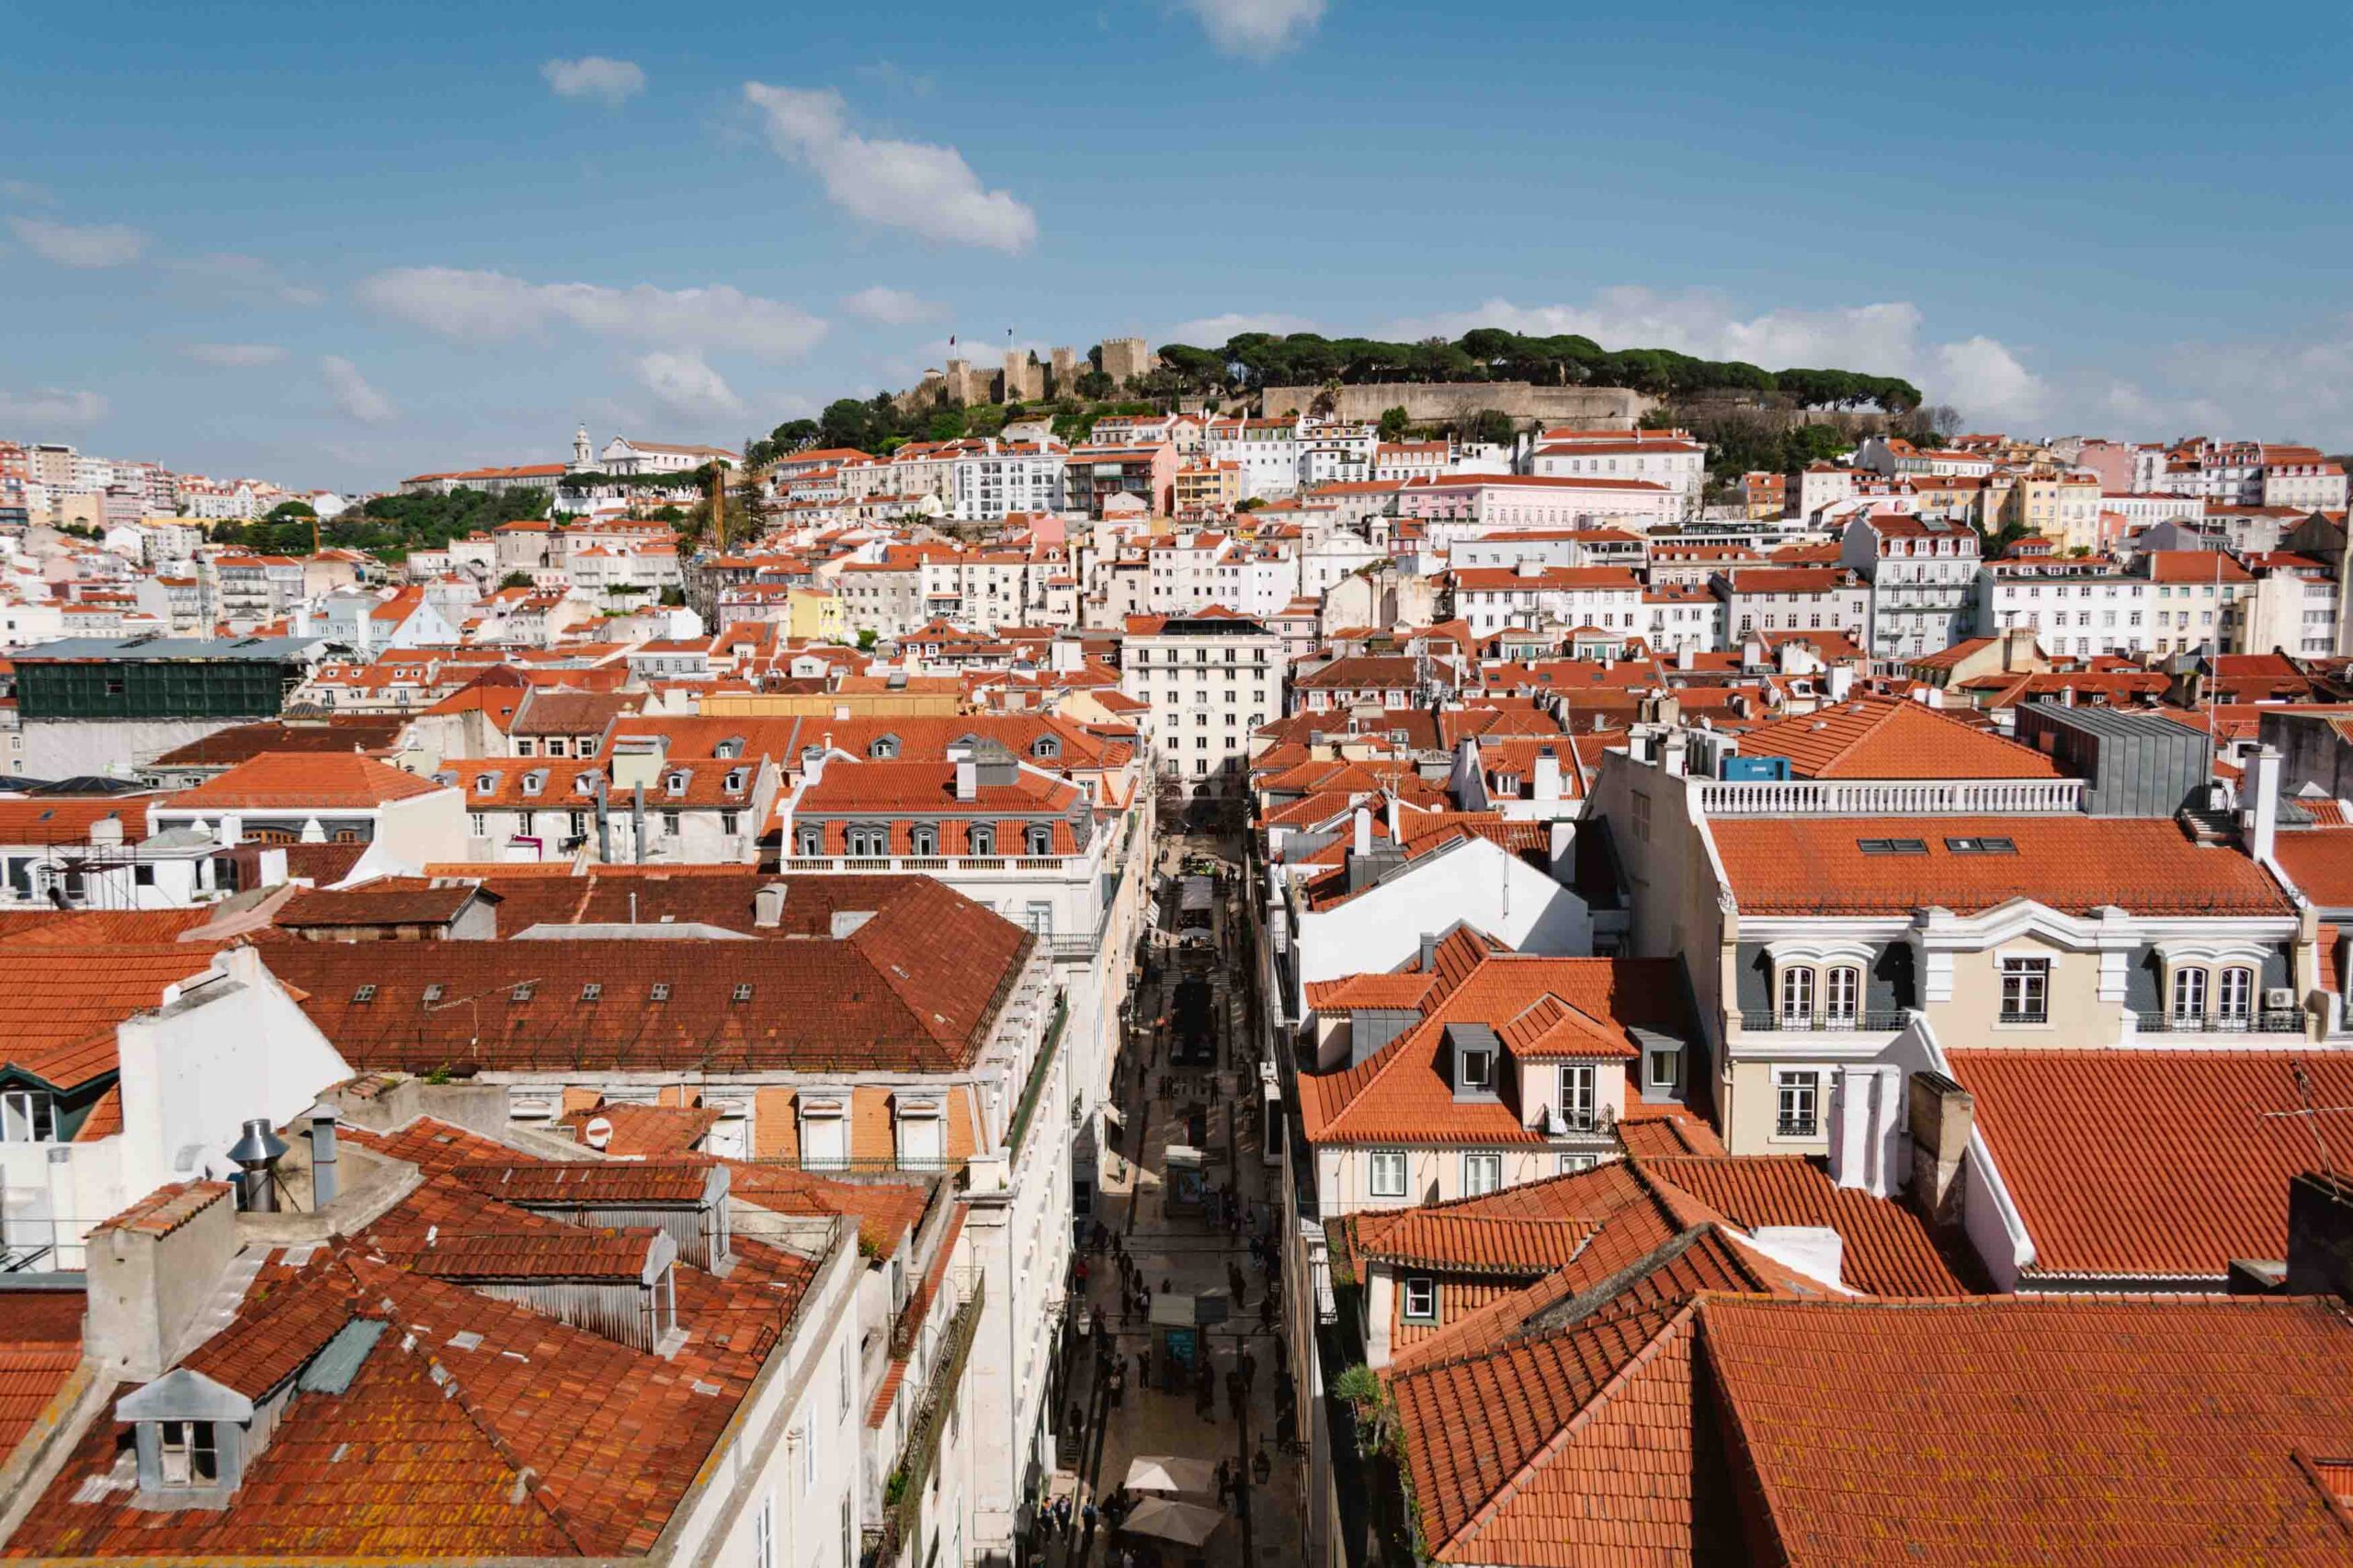 View of the city of Lisbon from the top of the Santa Justa Lift